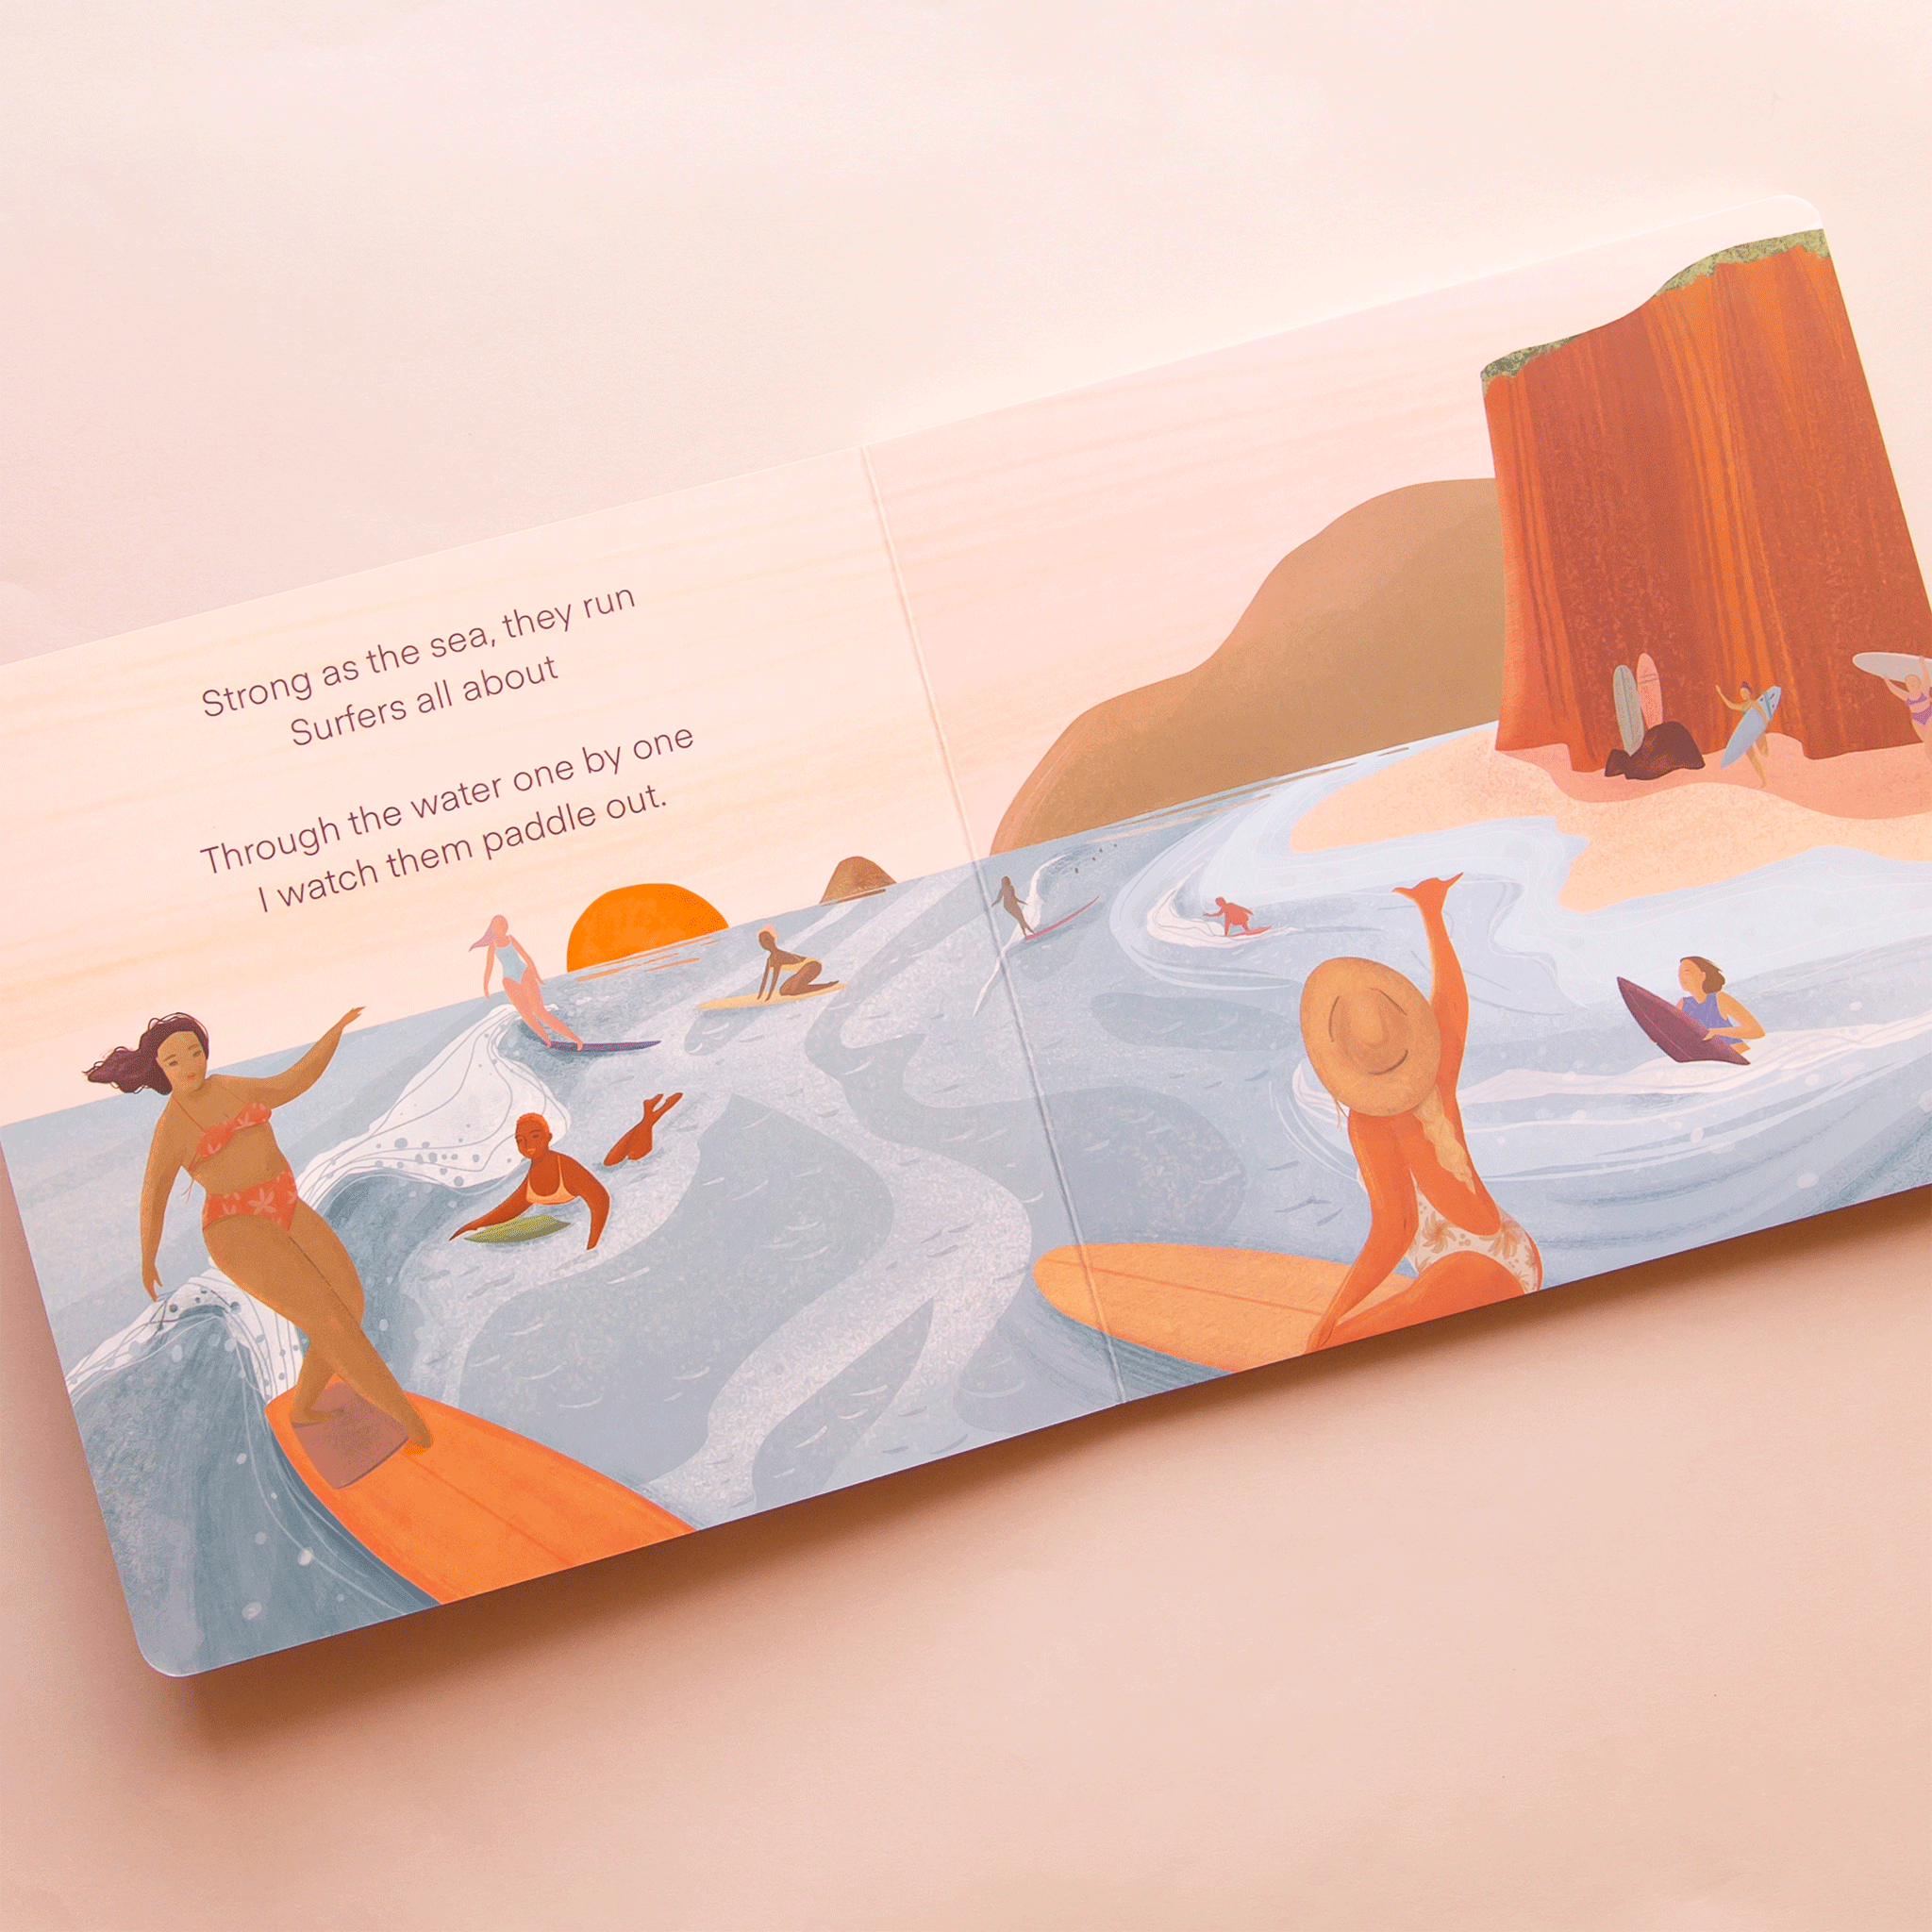 On a pink background is the book open to a page with illustrations of a beach and the ocean along with women in the water surfing and text that reads, "Strong as the sea they run Surfers all about Through the water one by one I watch them paddle out". 